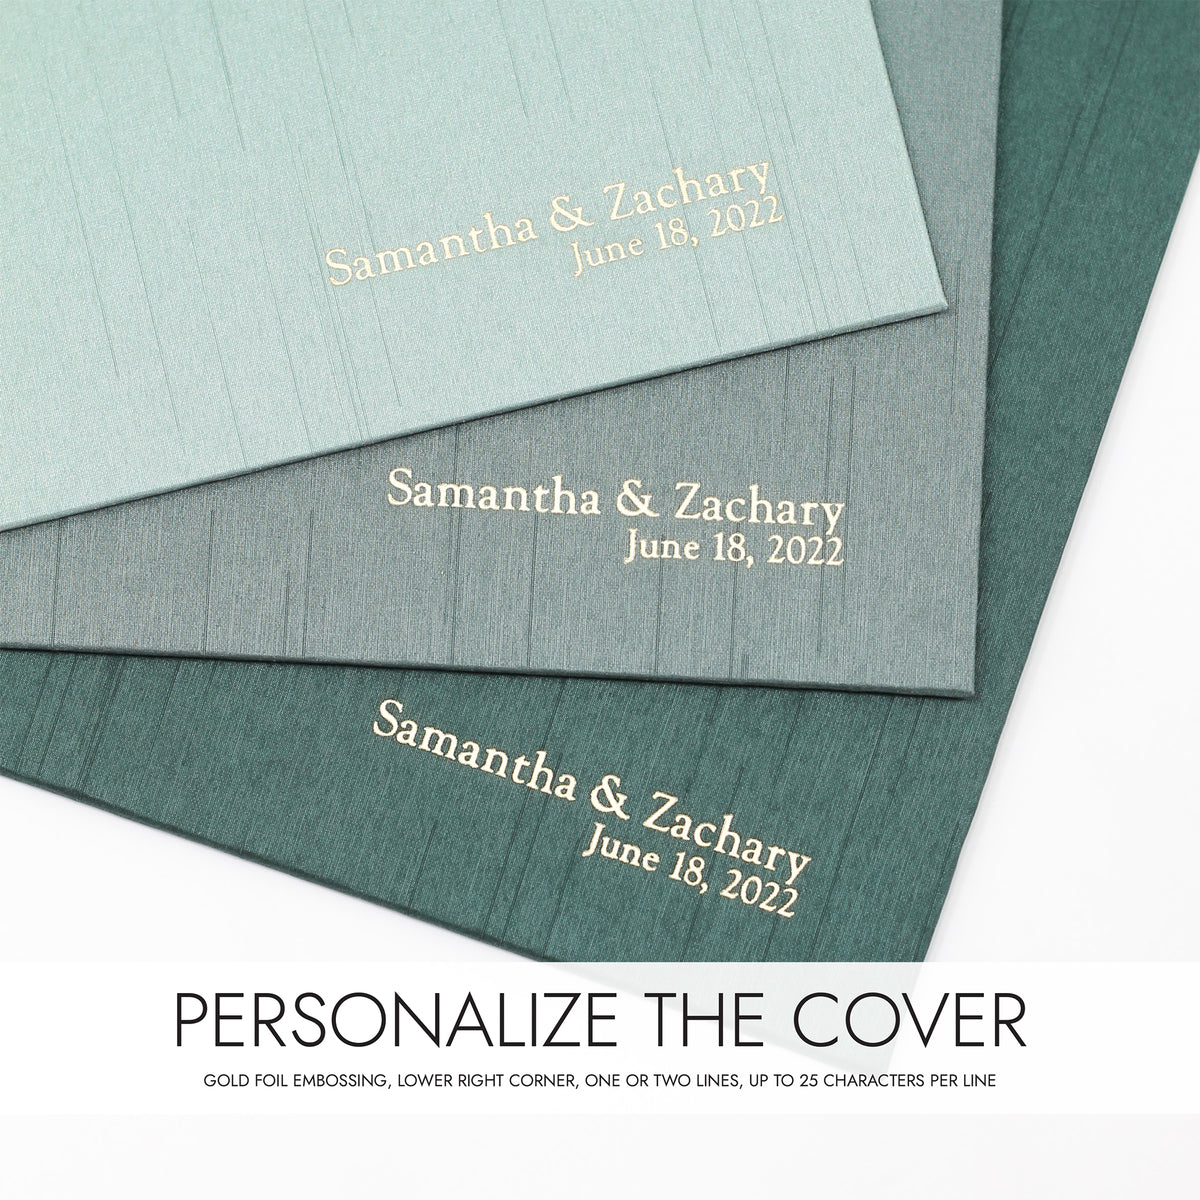 Event Guestbook Embossed with “Guests” | Cover: Jade Silk | Available Personalized